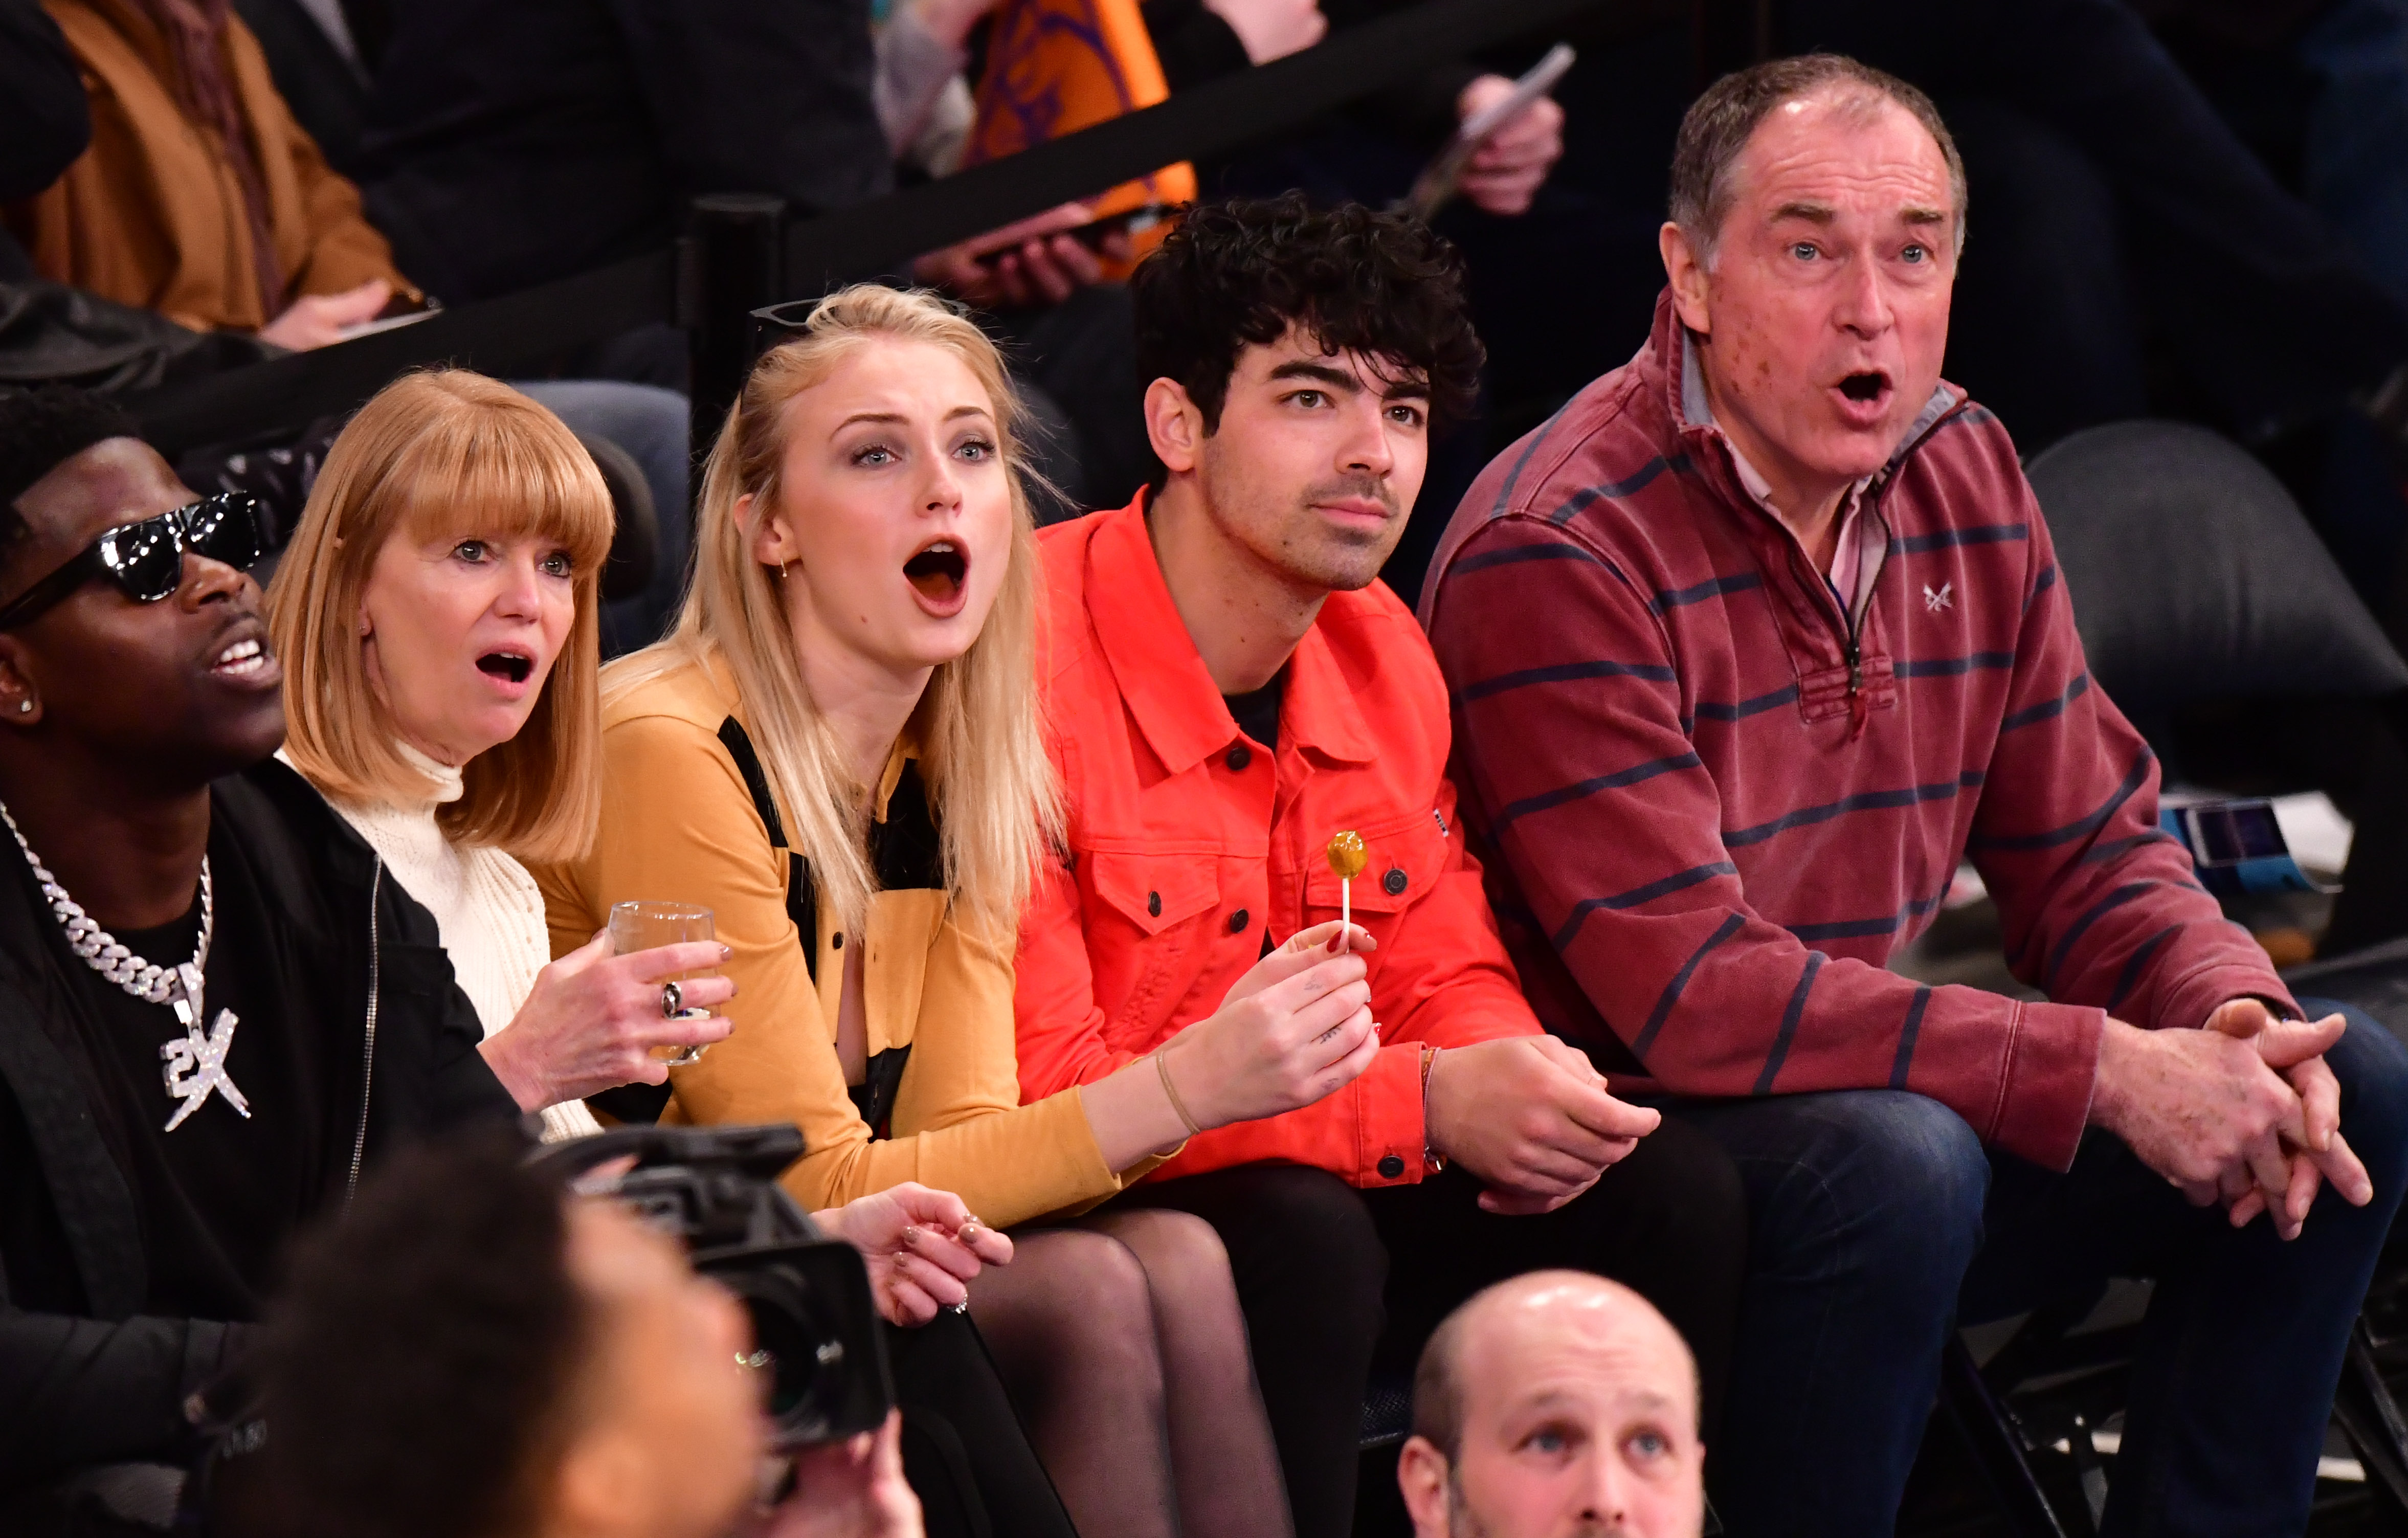 NEW YORK, NY - MARCH 09:  Sophie Turner and Joe Jonas attend Sacramento Kings v New York Knicks game at Madison Square Garden on March 9, 2019 in New York City.  (Photo by James Devaney/Getty Images) (James Devaney&mdash;Getty Images)